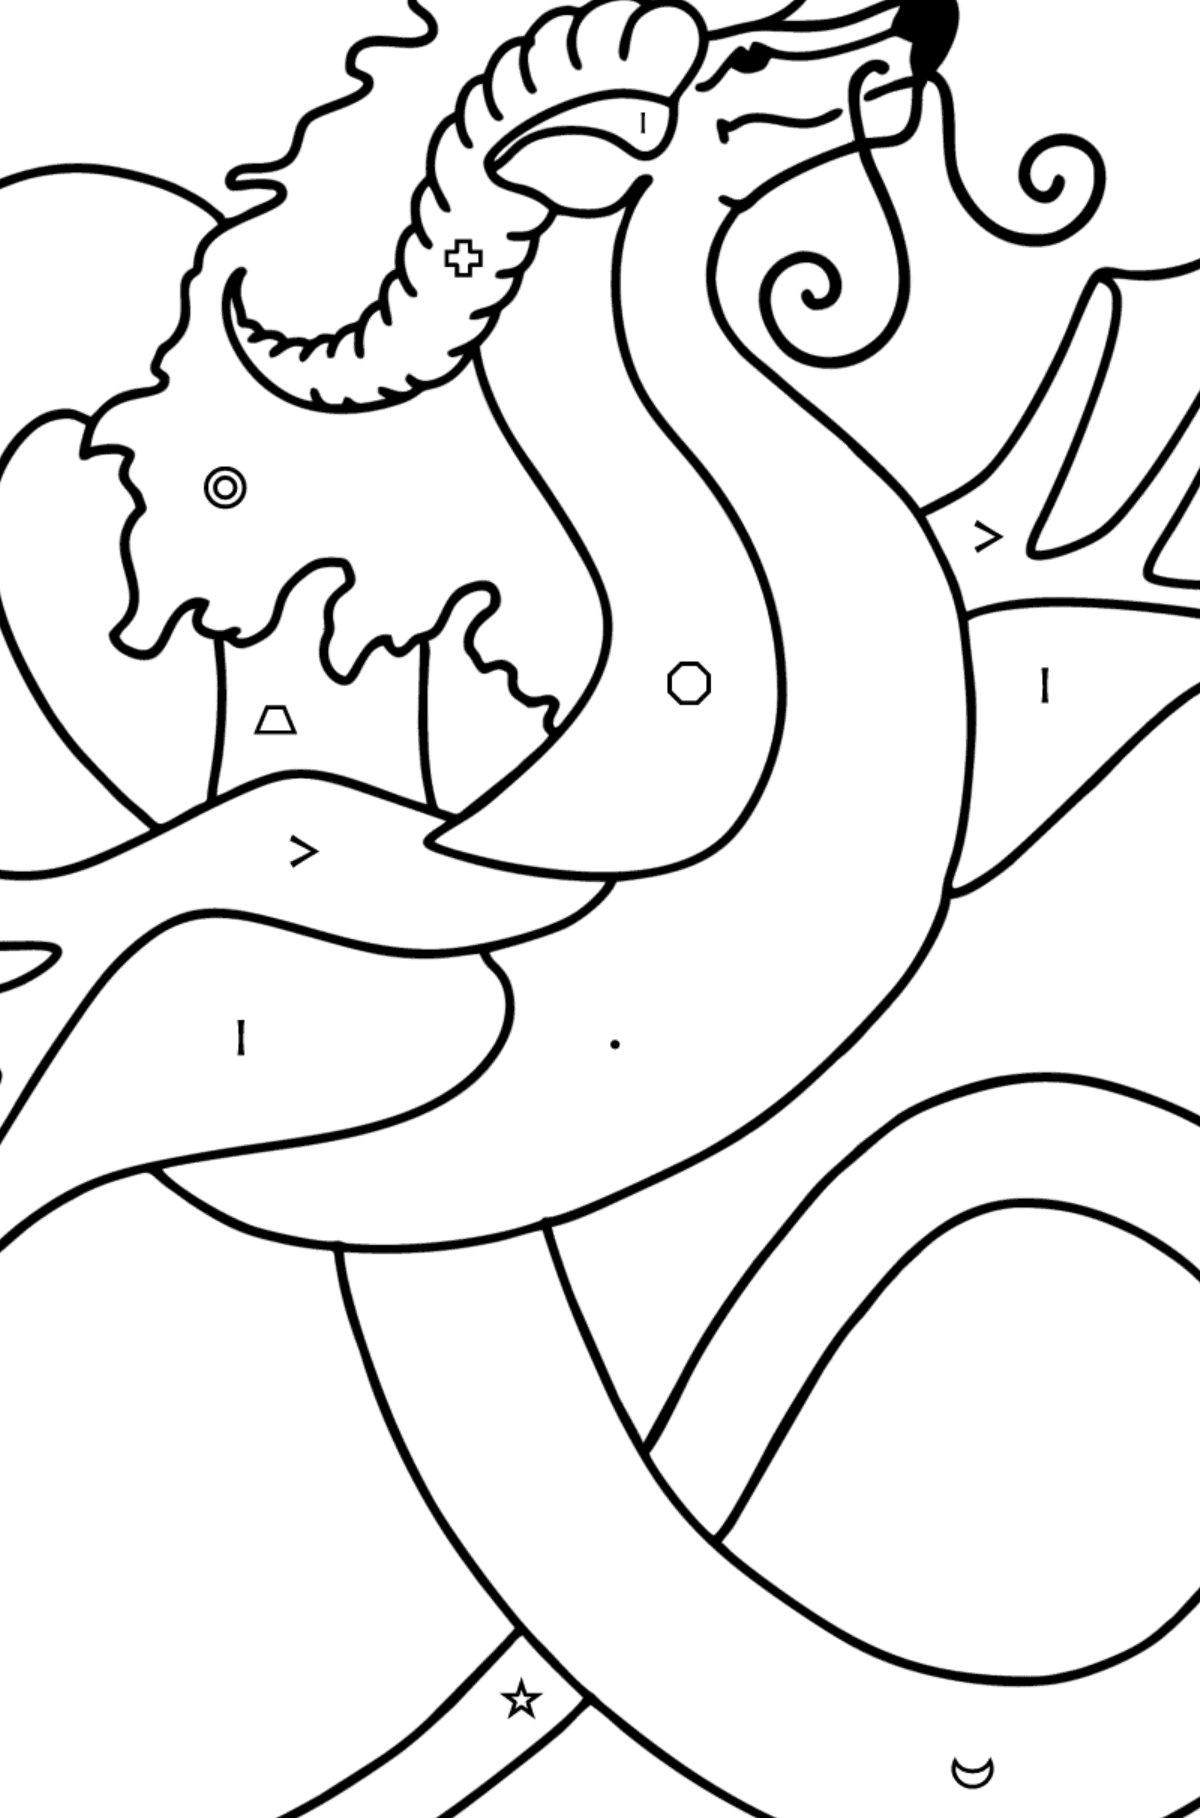 Flying Dragon coloring page - Coloring by Symbols and Geometric Shapes for Kids